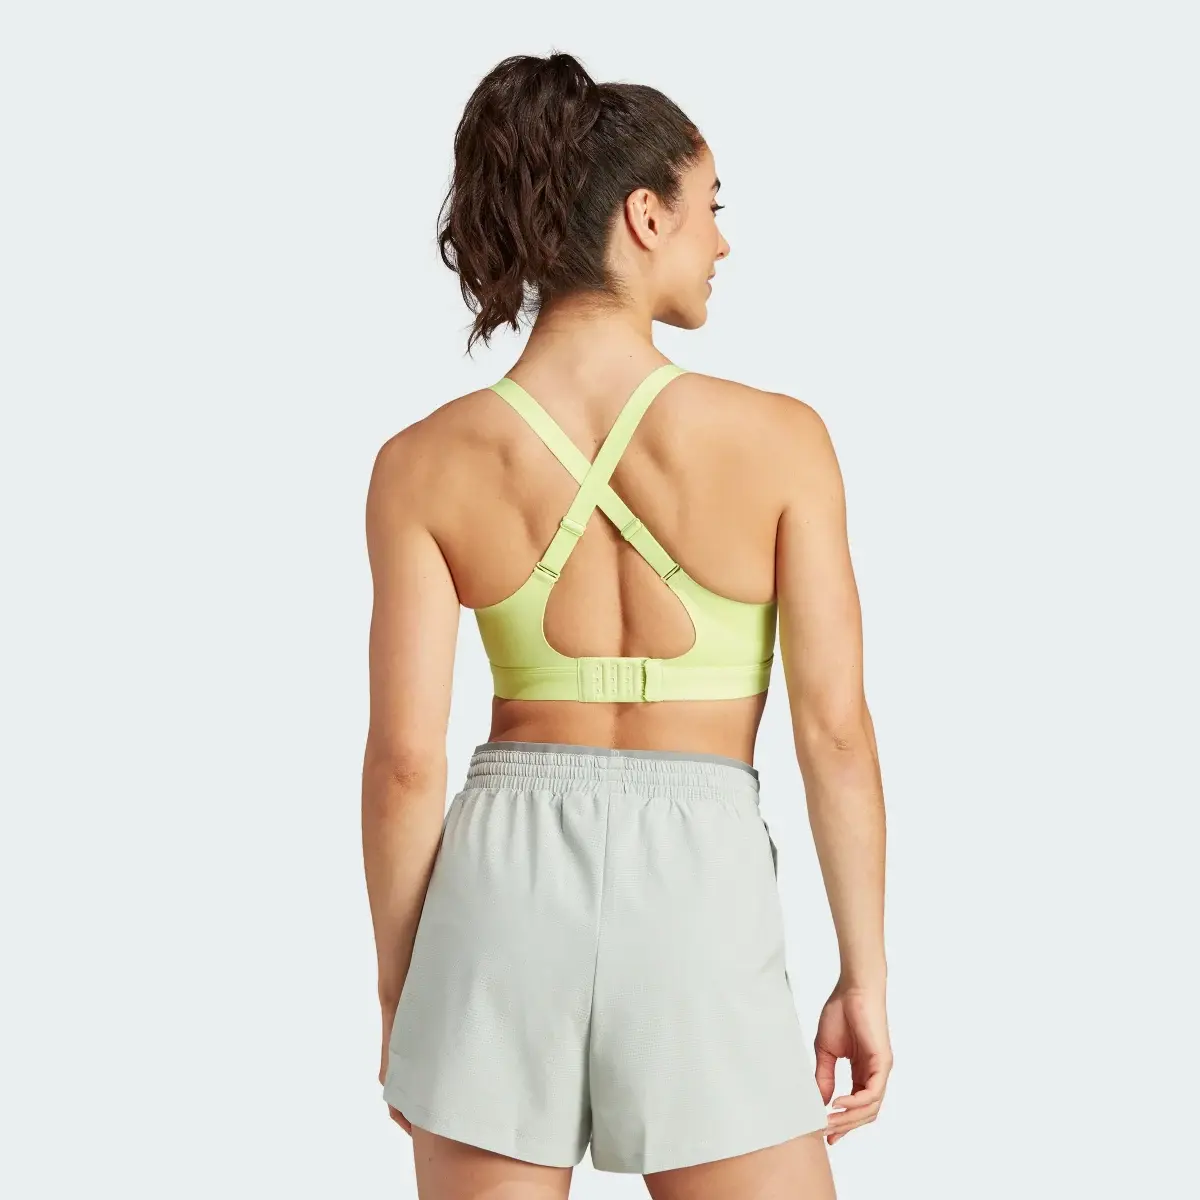 Adidas Brassière Tailored Impact Luxe Training Maintien fort. 3